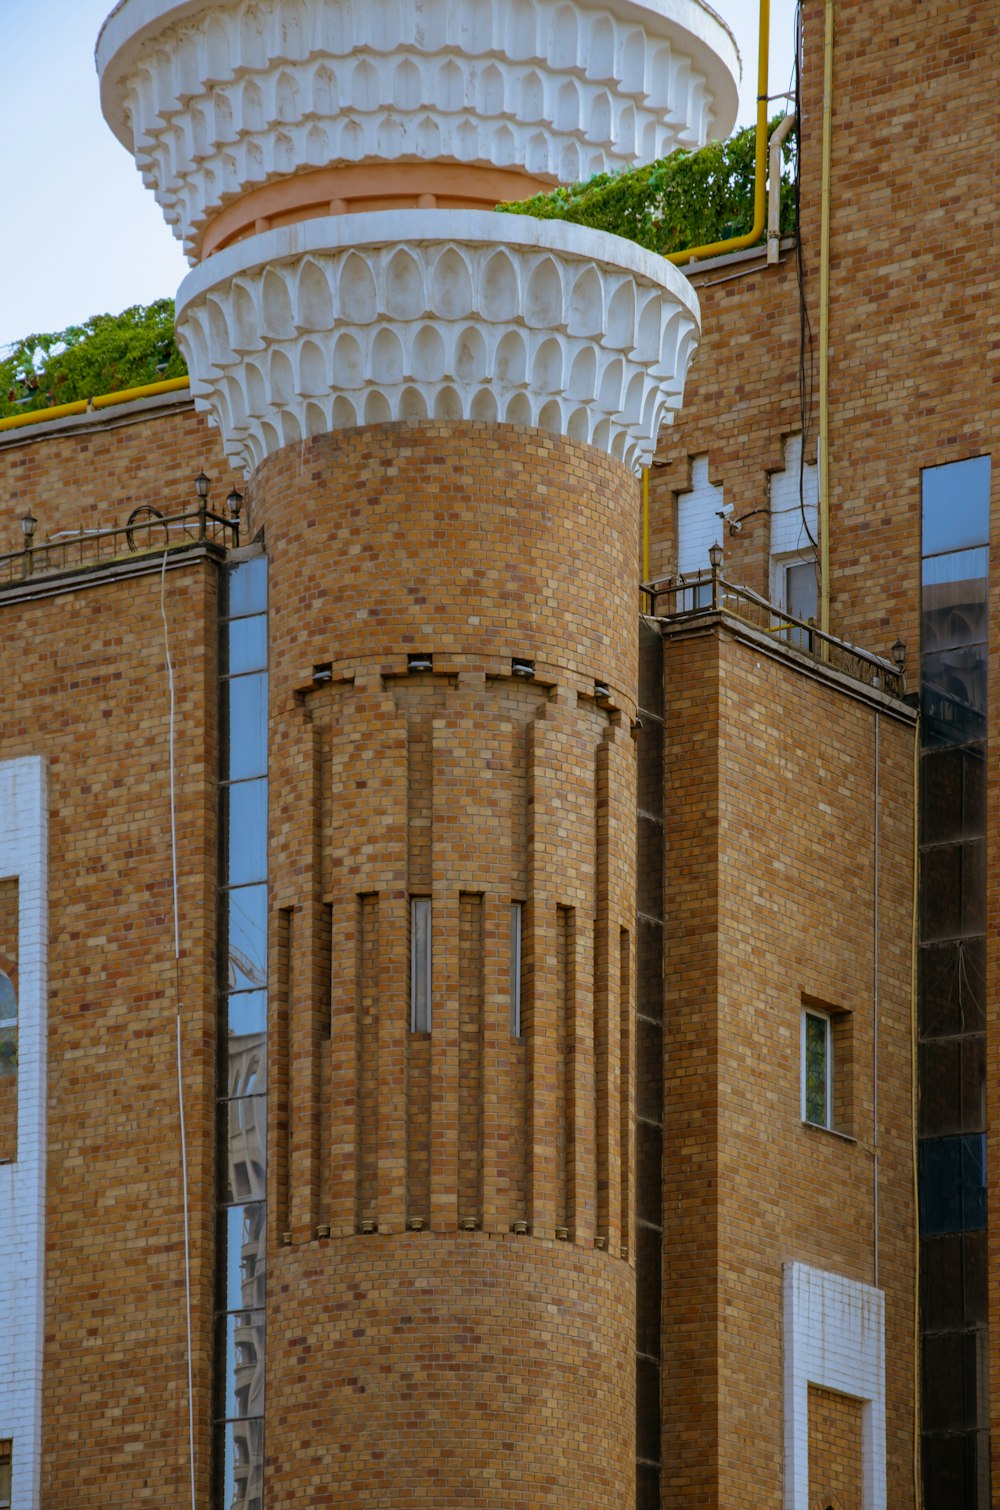 a tall brick building with a clock on the top of it